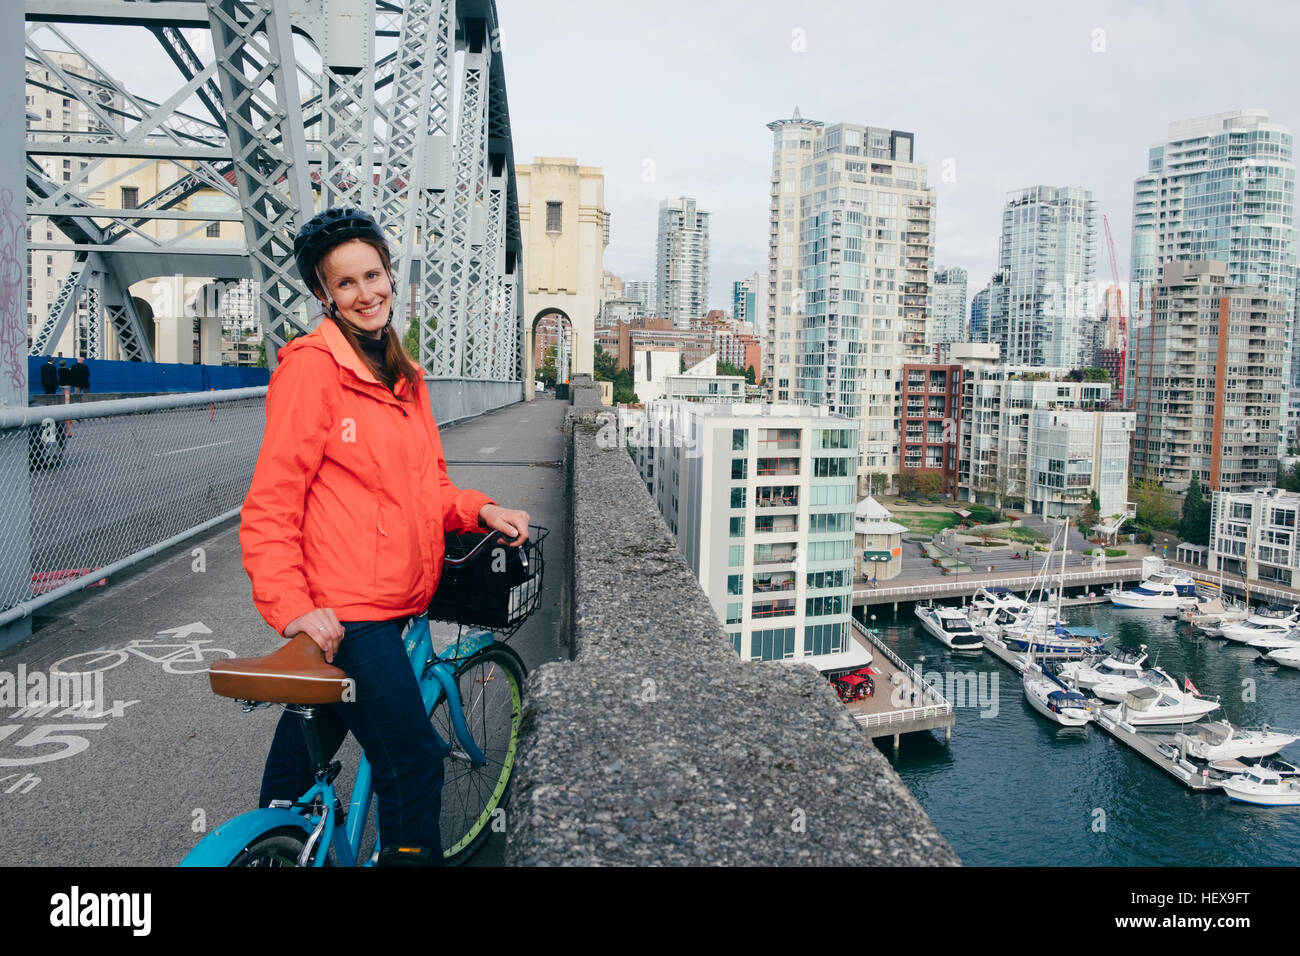 Portrait of young woman ready to ride bicycle on cycle path, Vancouver, British Columbia, Canada Stock Photo